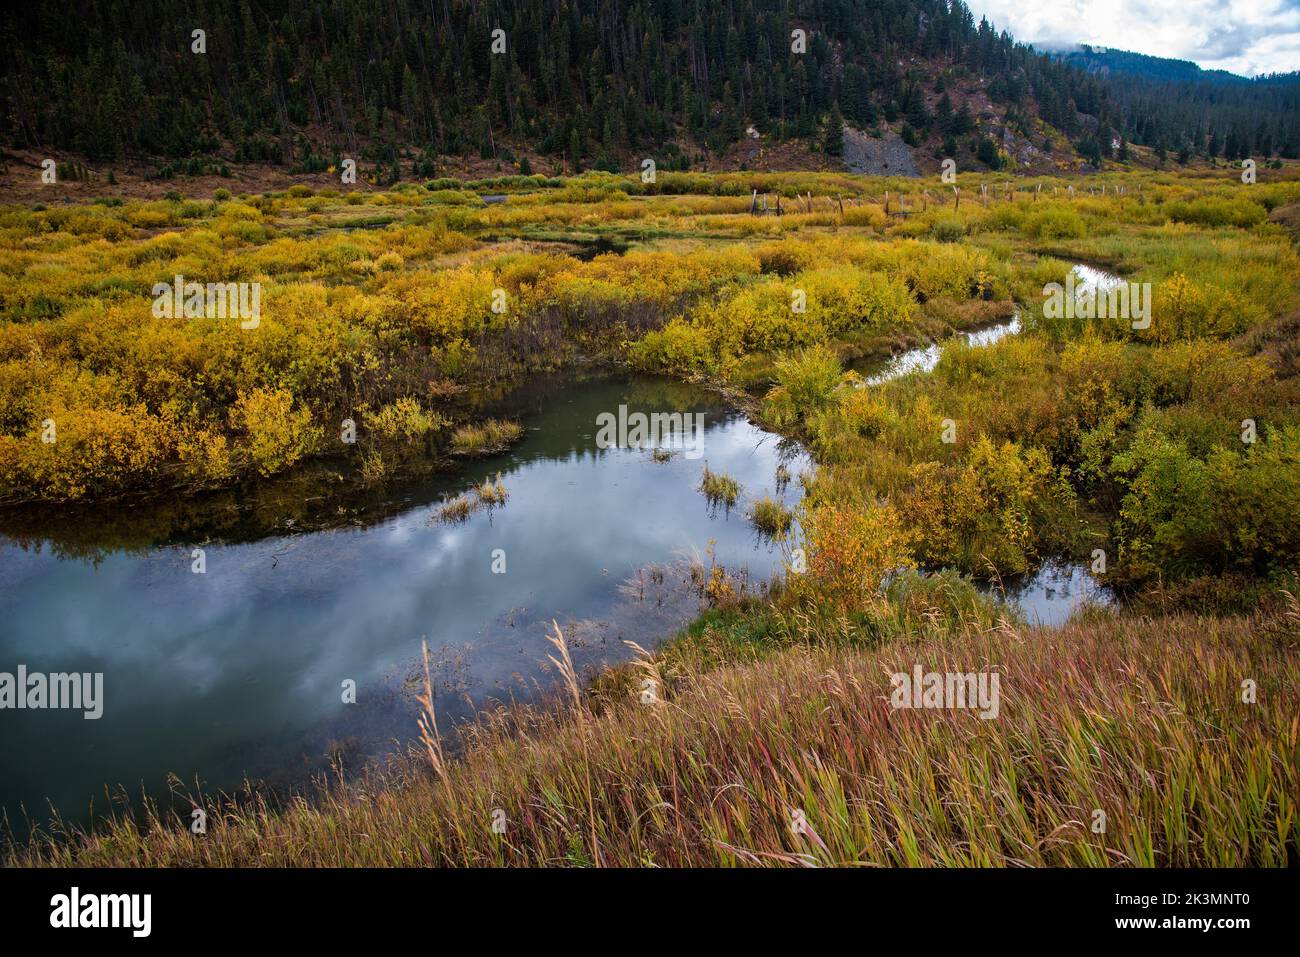 Golden meadows along a meandering stream in West Yellowstone, Montana. The grass turns to warm autumn colors in September and October. Stock Photo